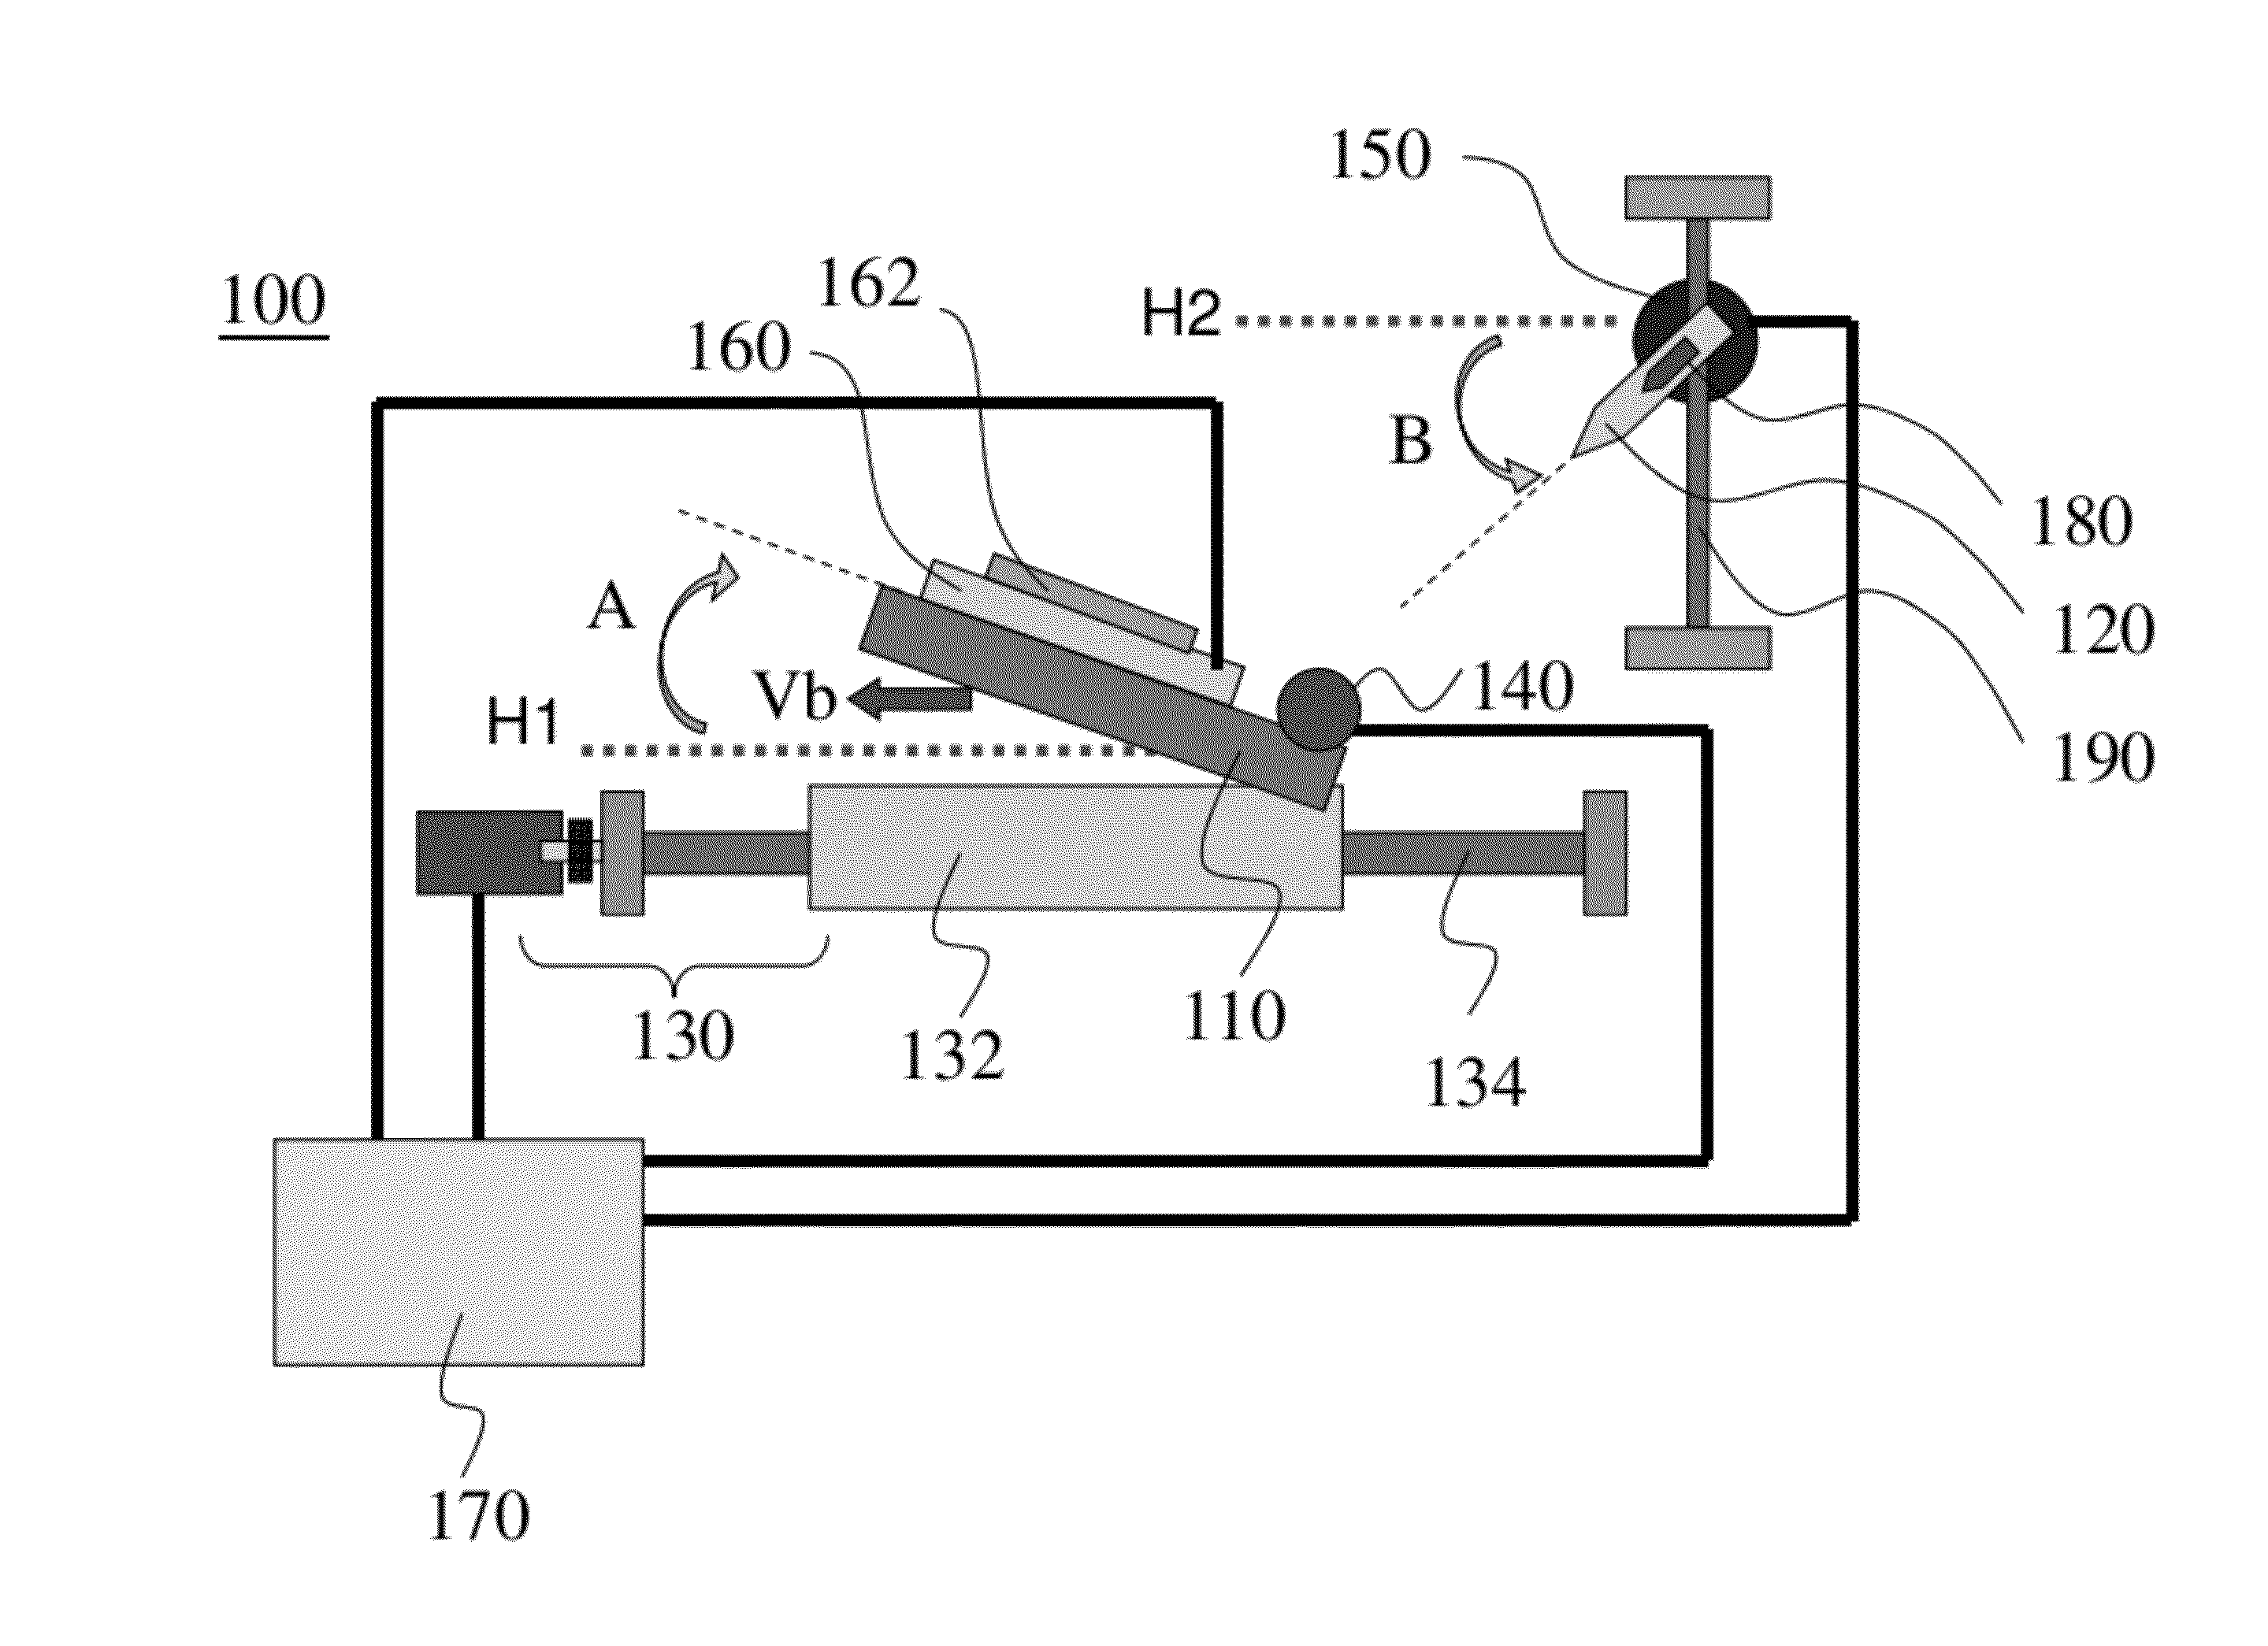 Apparatus for measuring peeling force of adhesive